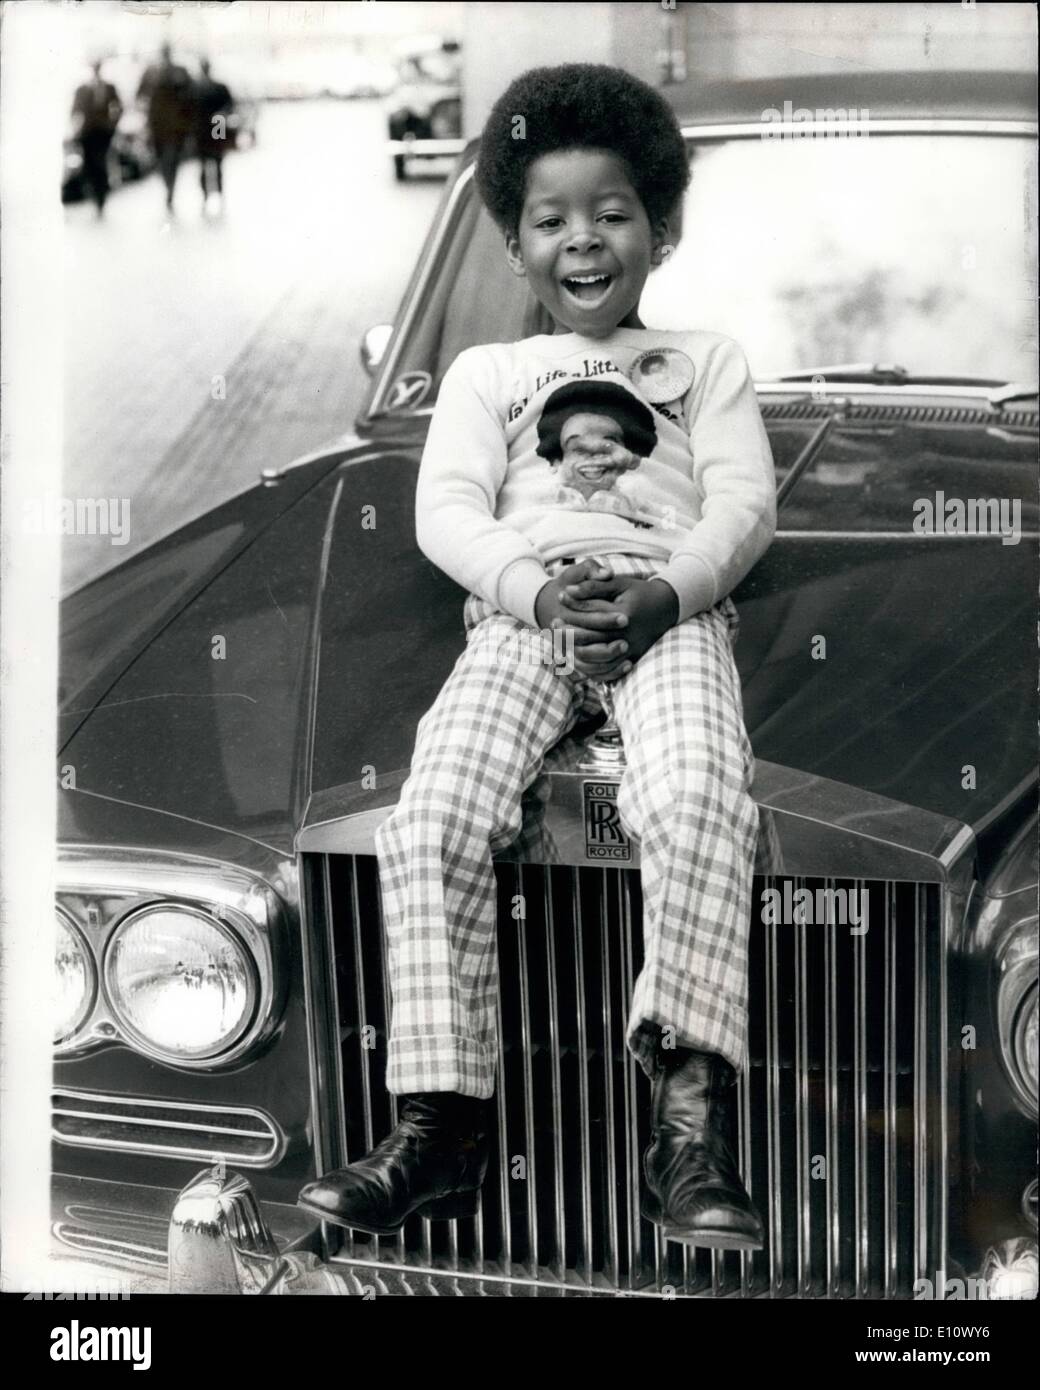 May 05, 1974 - Five Year Old Superstar in London. Pop star and actor Rodney Allen Rippy, who is superstar at the age of 5, arrived in London today from America. Rodney, son of an American ethnic dustman, first shot to fame when he was three when he appeared in a TV hamburger commercial, and is expected to be a dollar millionaire before he is six. He is over here to appear on Yorkshire Television's Junior Showtime. Keystone Photo Shows: Rodney Allen Rippy gets the feel of a Rolls Royce car, after giving a Press Conference at the Tower Hotel, St. Catherine's Way, London, today. Stock Photo